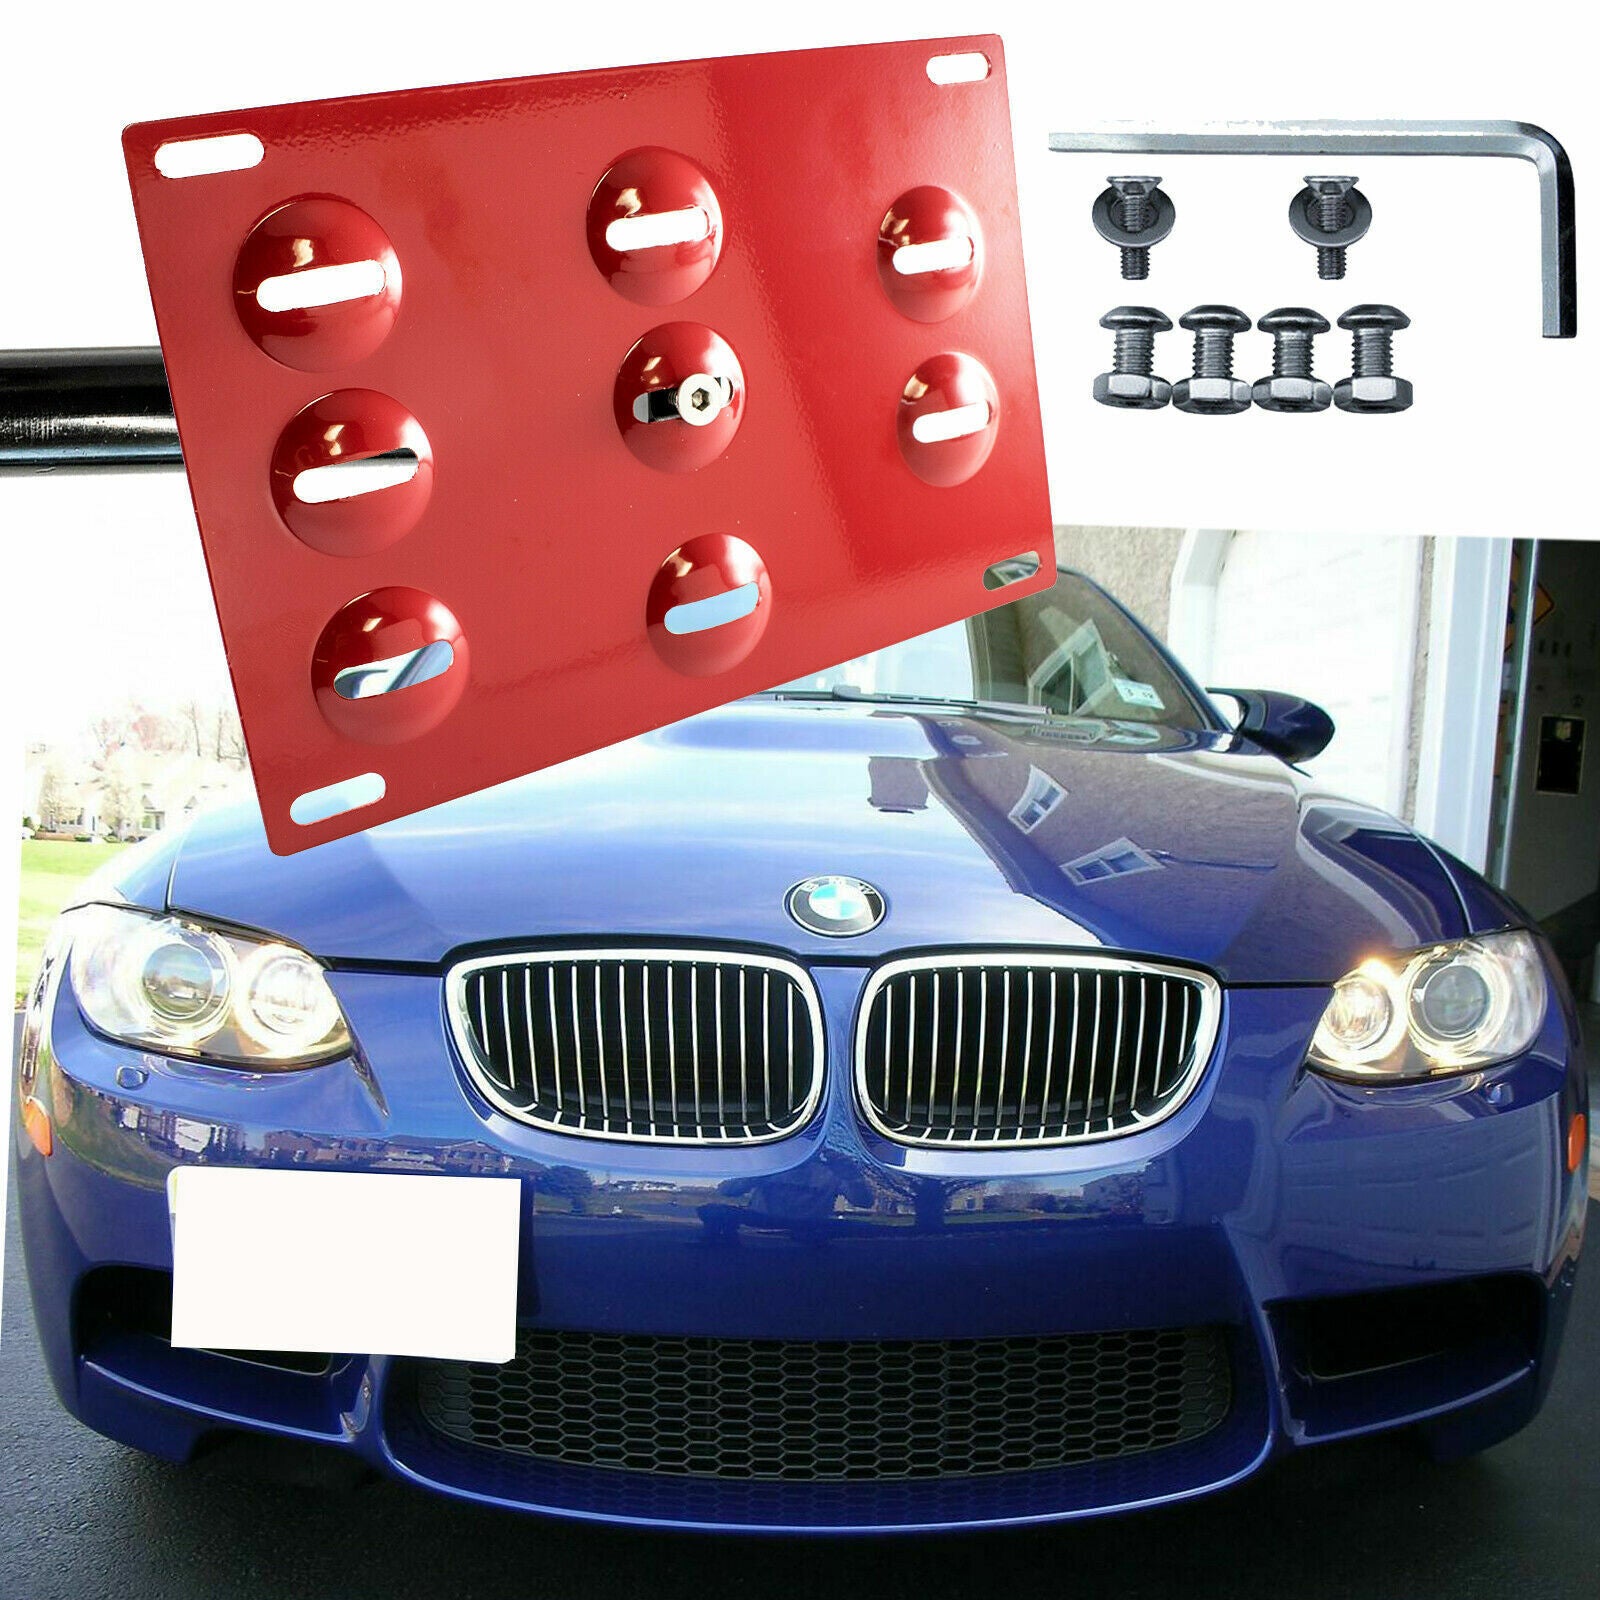 Red Tow Hook License Plate Mounting Bracket For BMW 325i 328i 330i